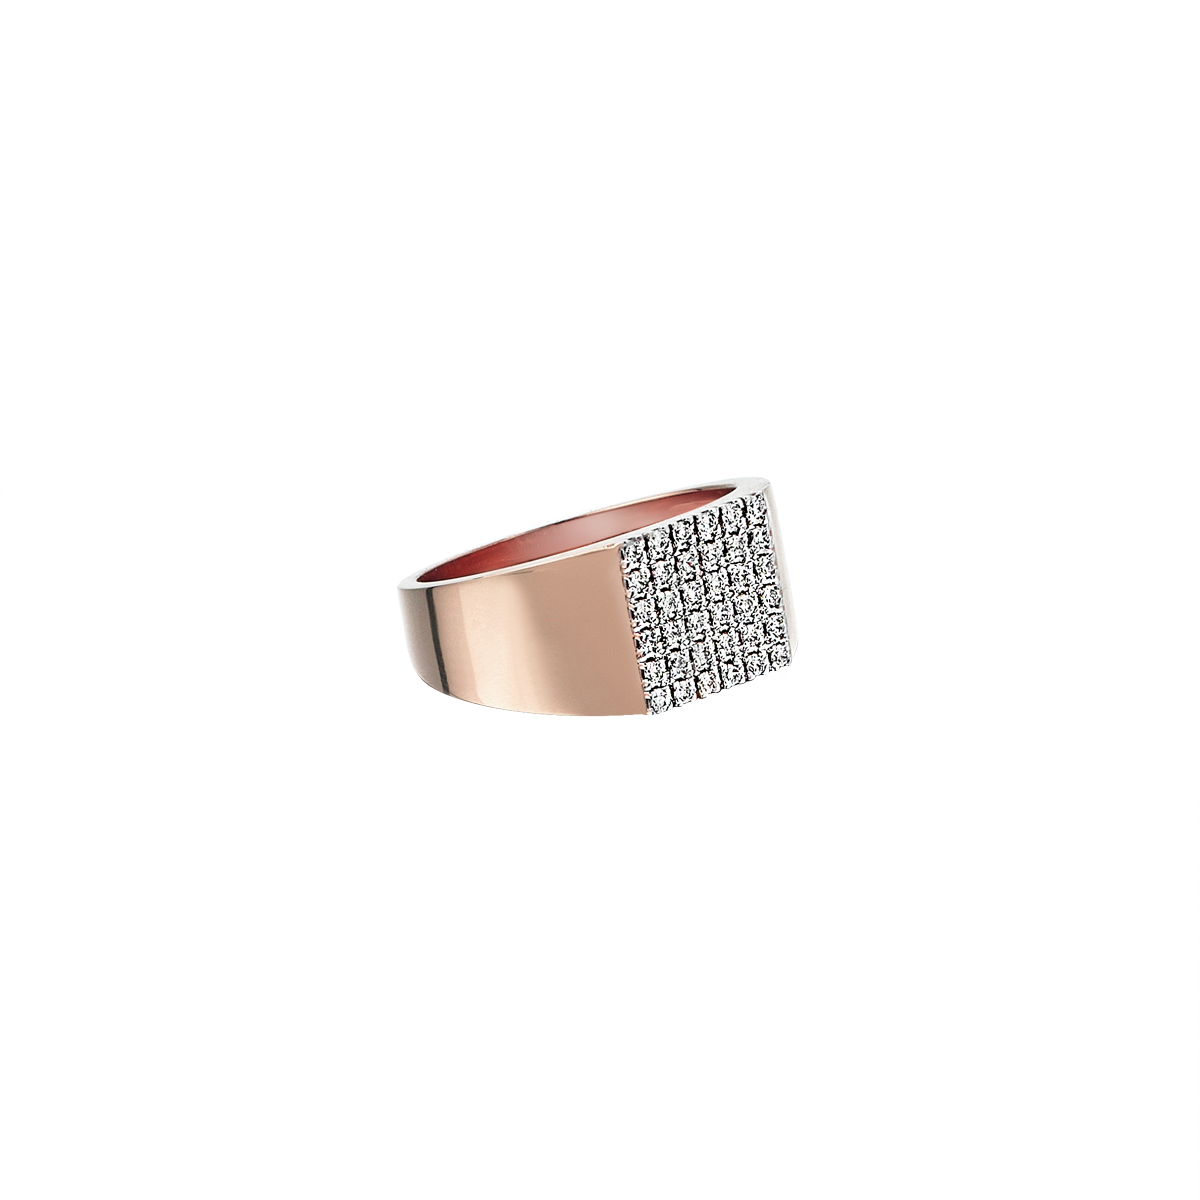 Pave Square Ring in Rose Gold - Her Story Shop